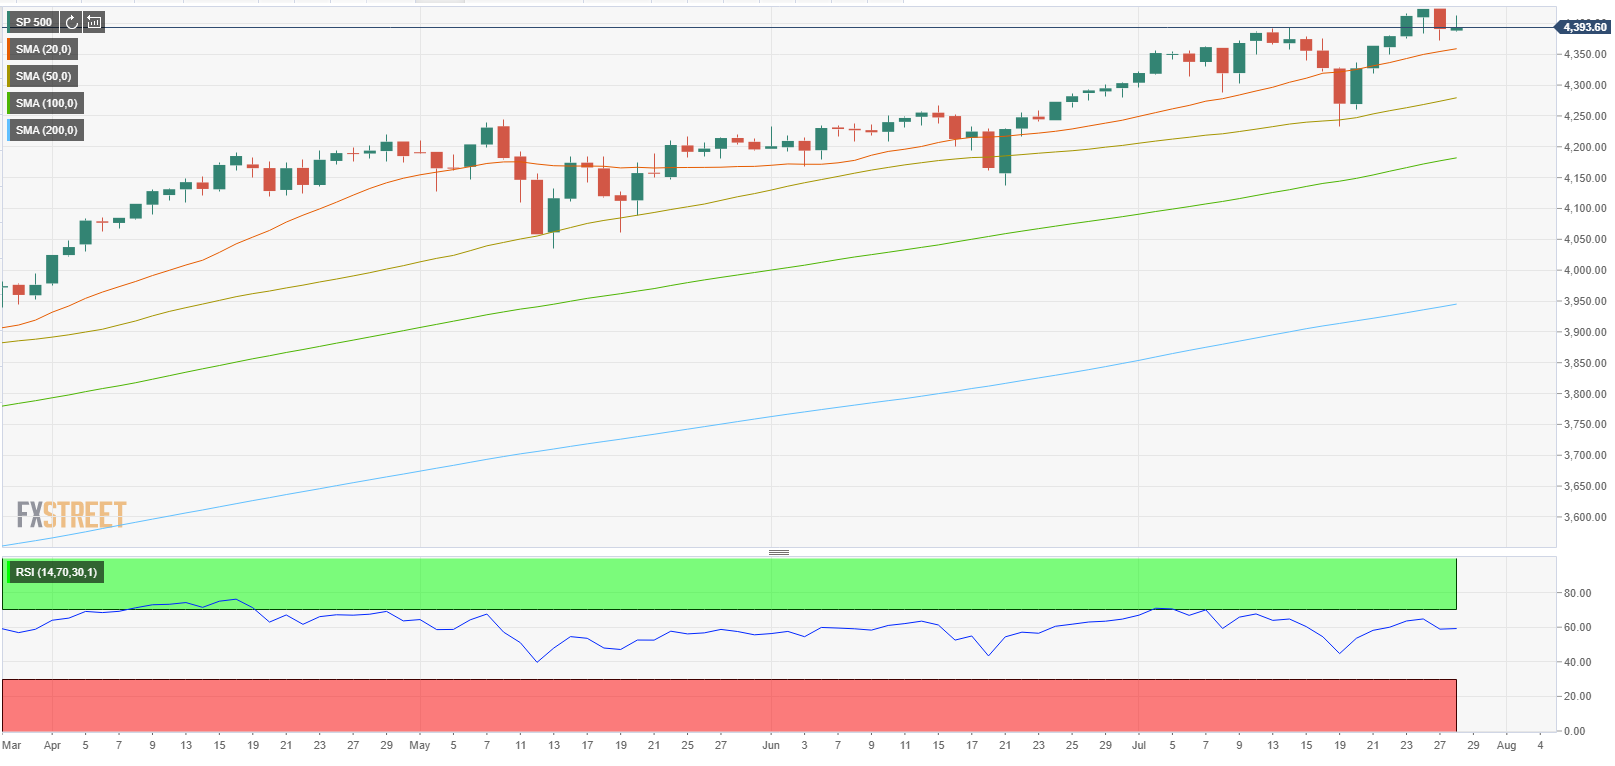 S&P 500 opens sideways near 4,400 as focus shifts to FOMC meeting